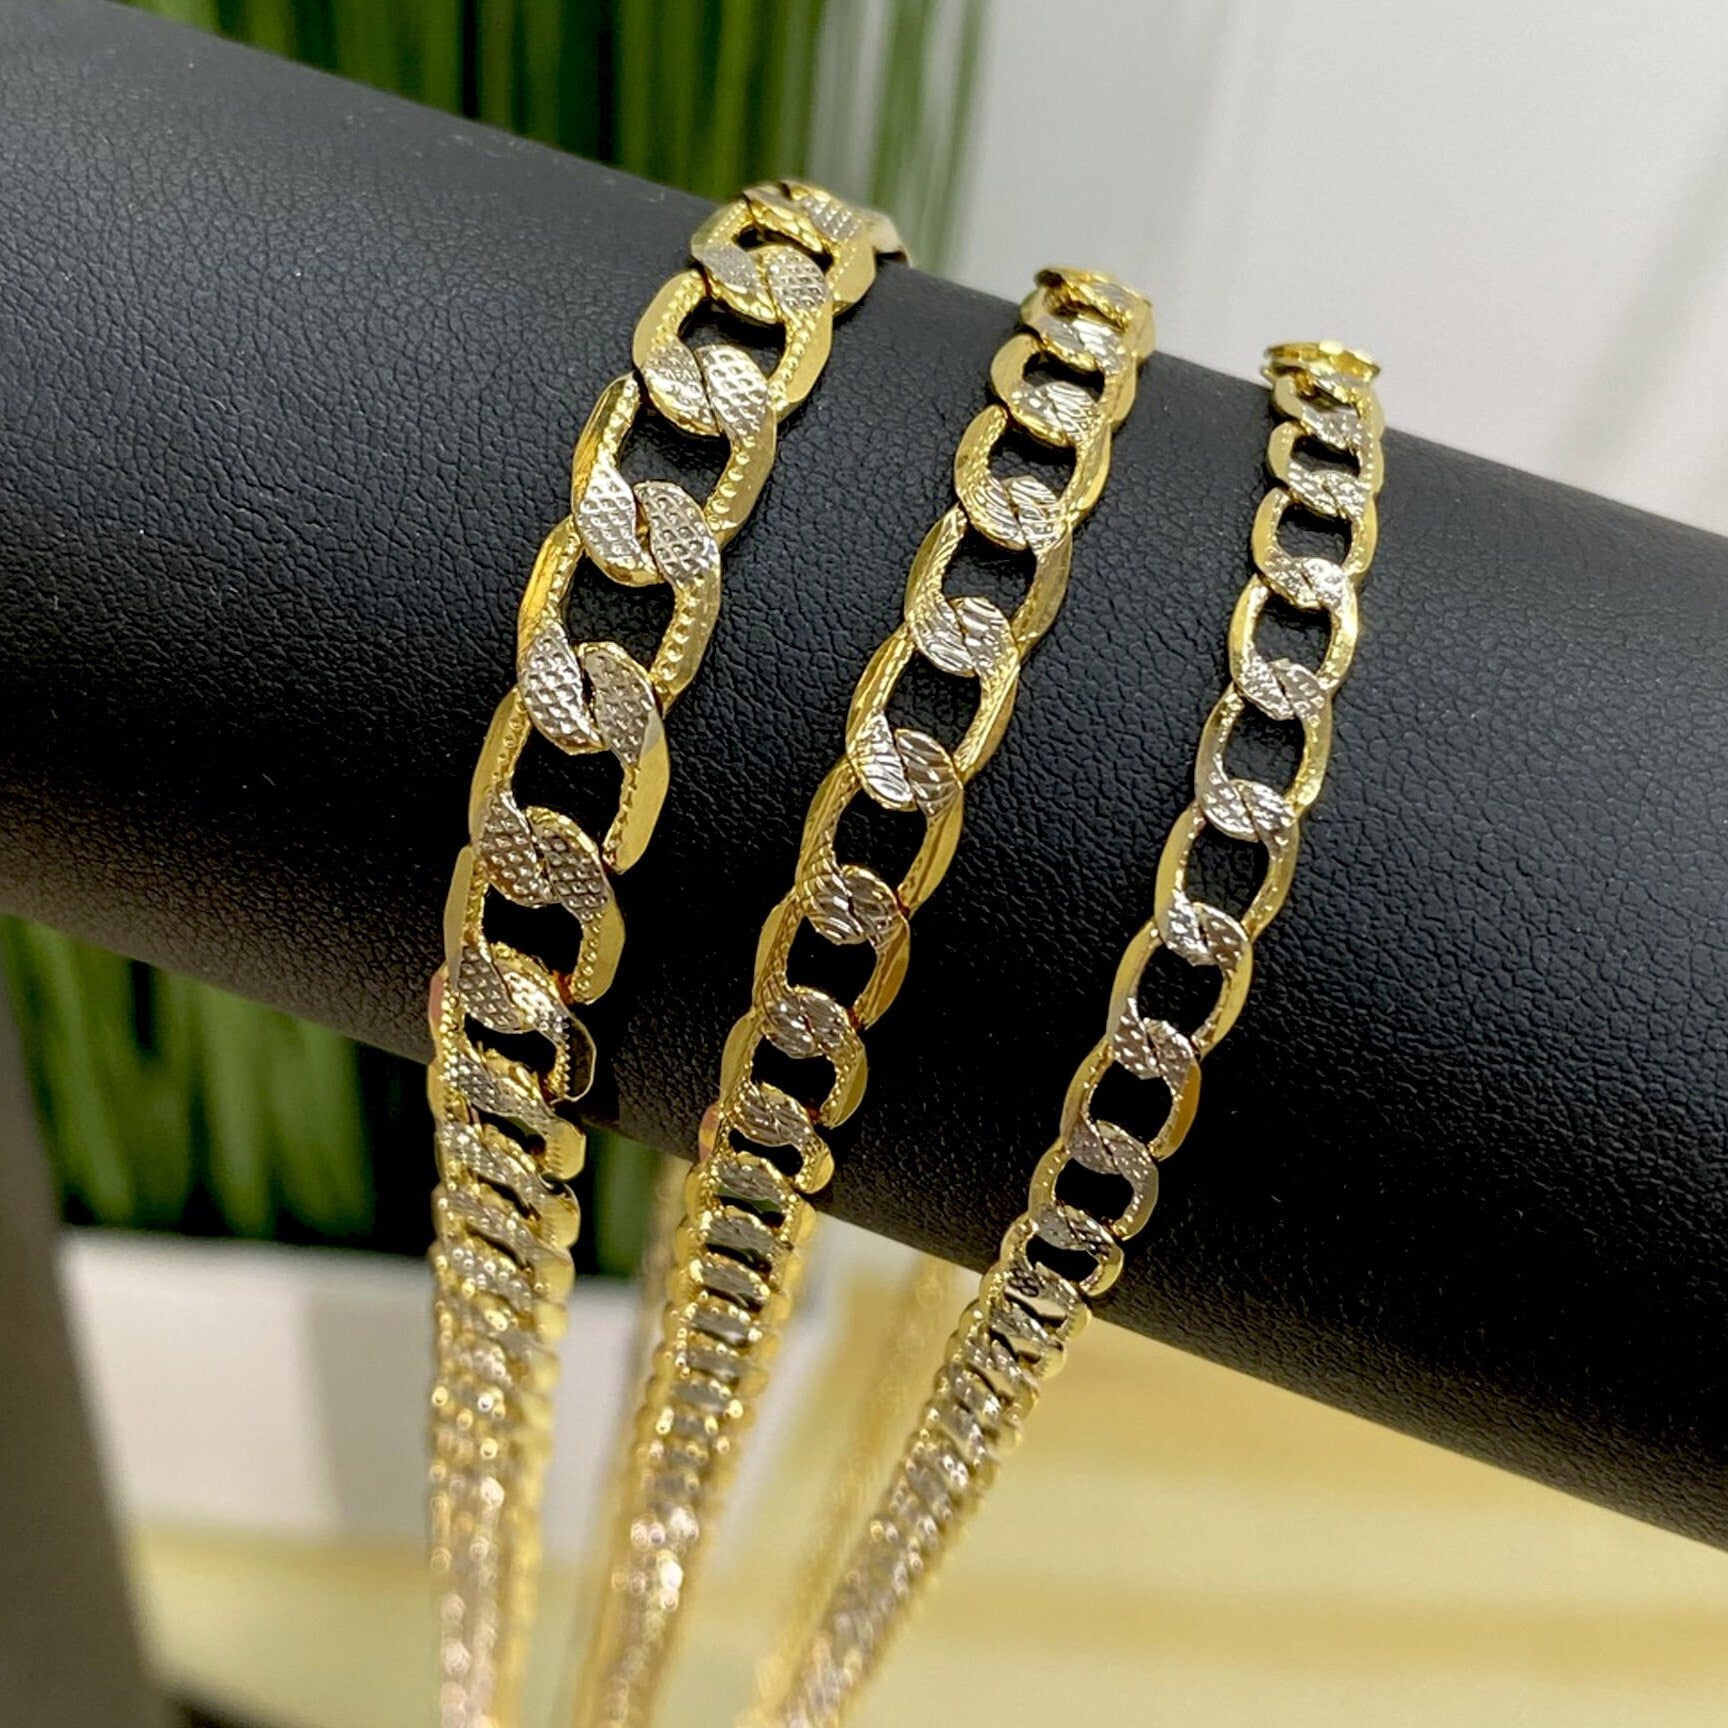 18k Gold Filled Cuban Curb Link, Two Tone Chain, Unisex Necklace, Wholesale Jewelry Making Supplies